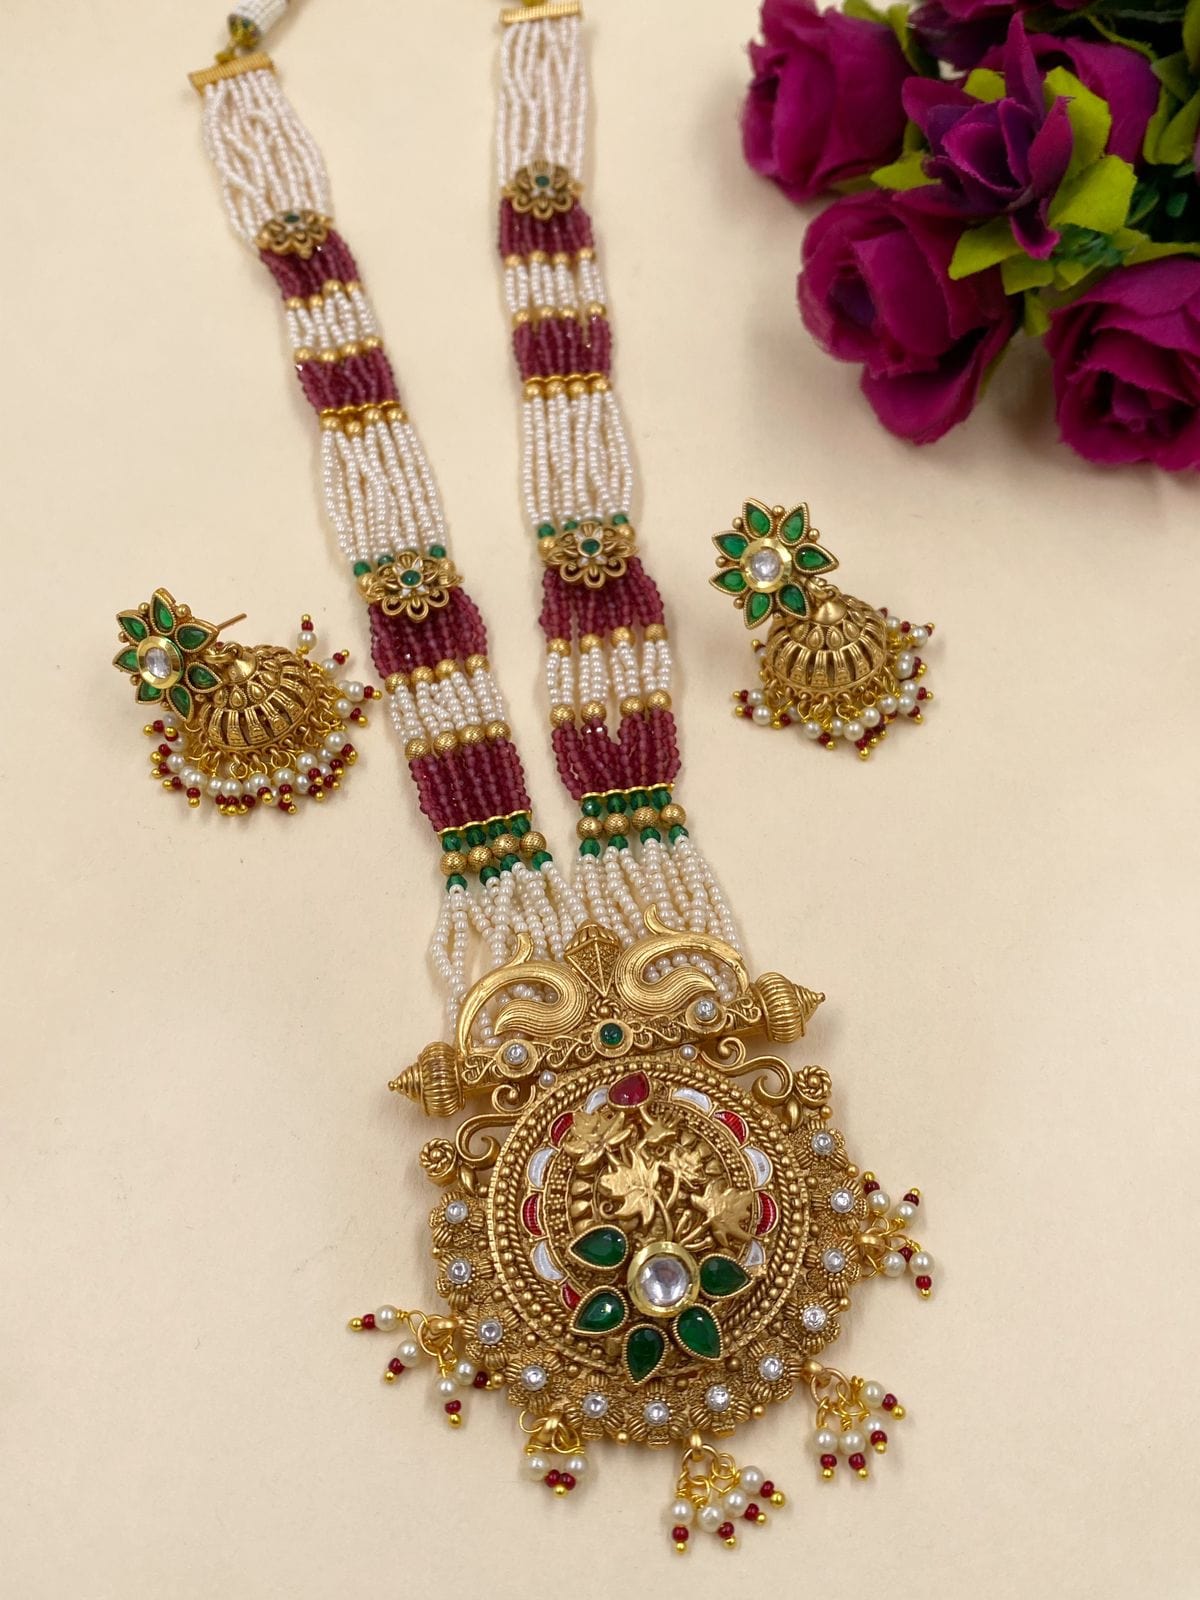 Traditional Long Pendant Necklace With Pearls For Weddings By Gehna Shop Antique Golden Necklace Sets